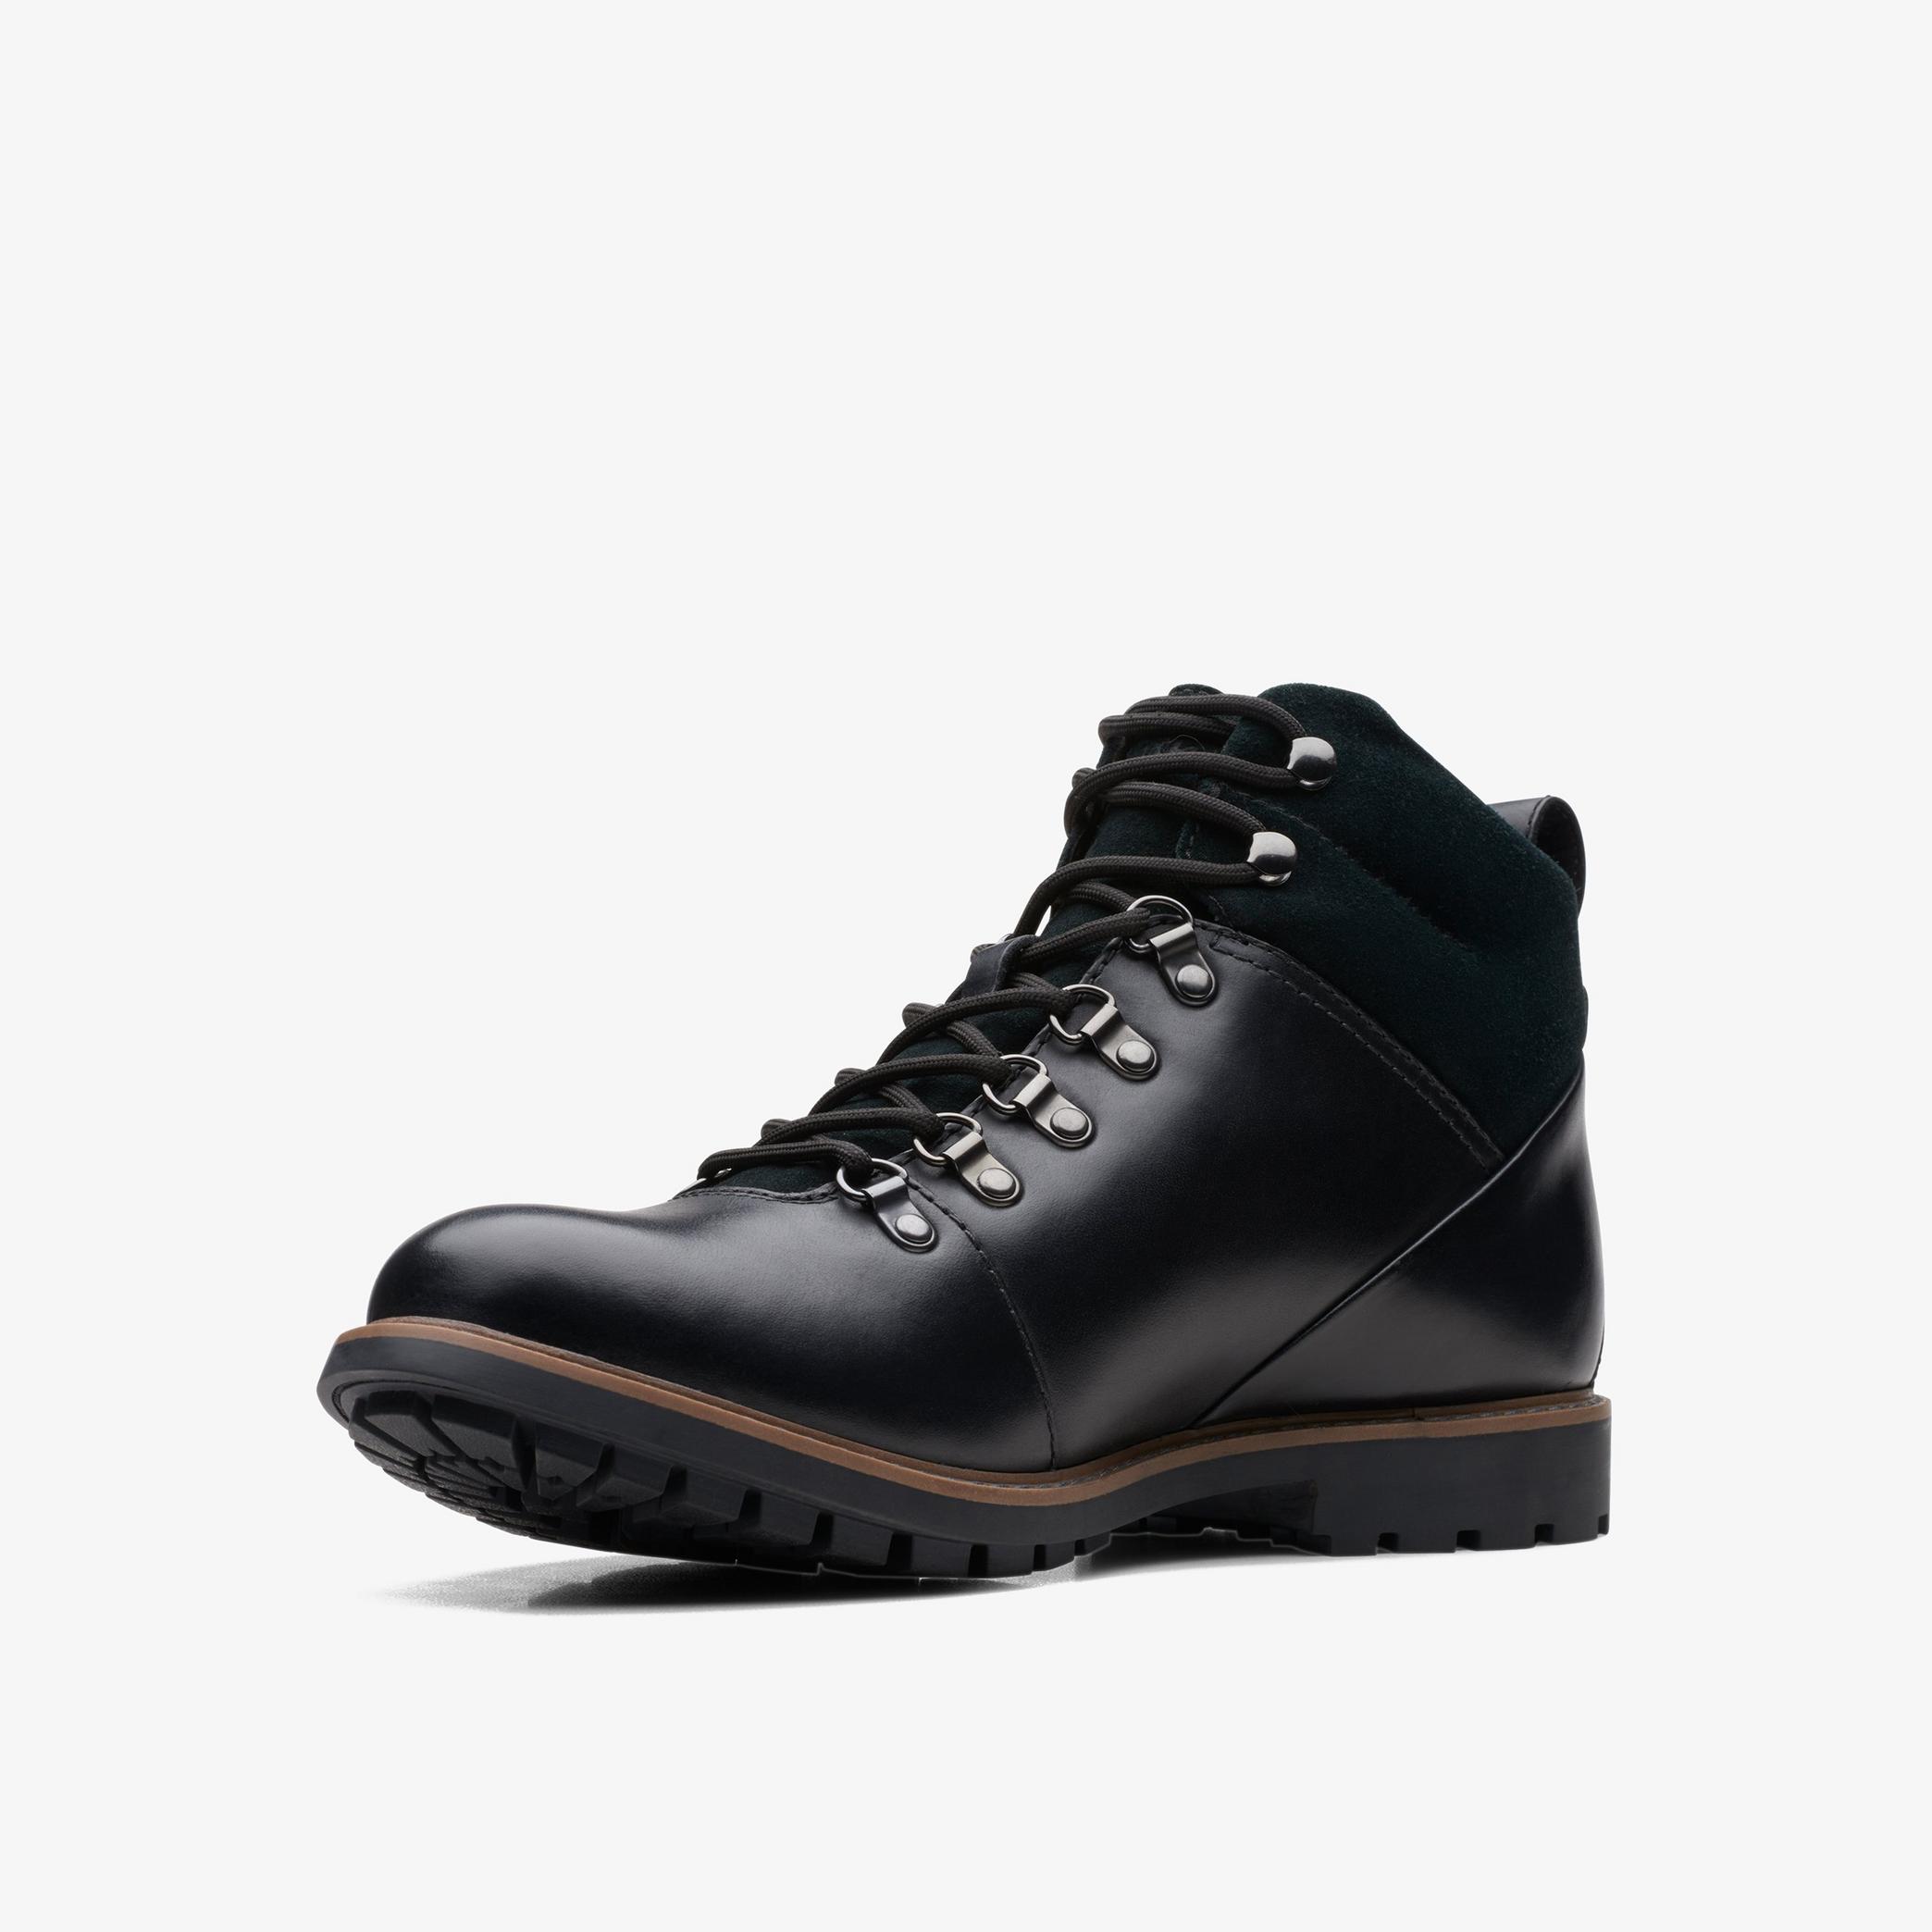 Westcombe Hi Waterproof Black Warmlined Leather Ankle Boots, view 4 of 6